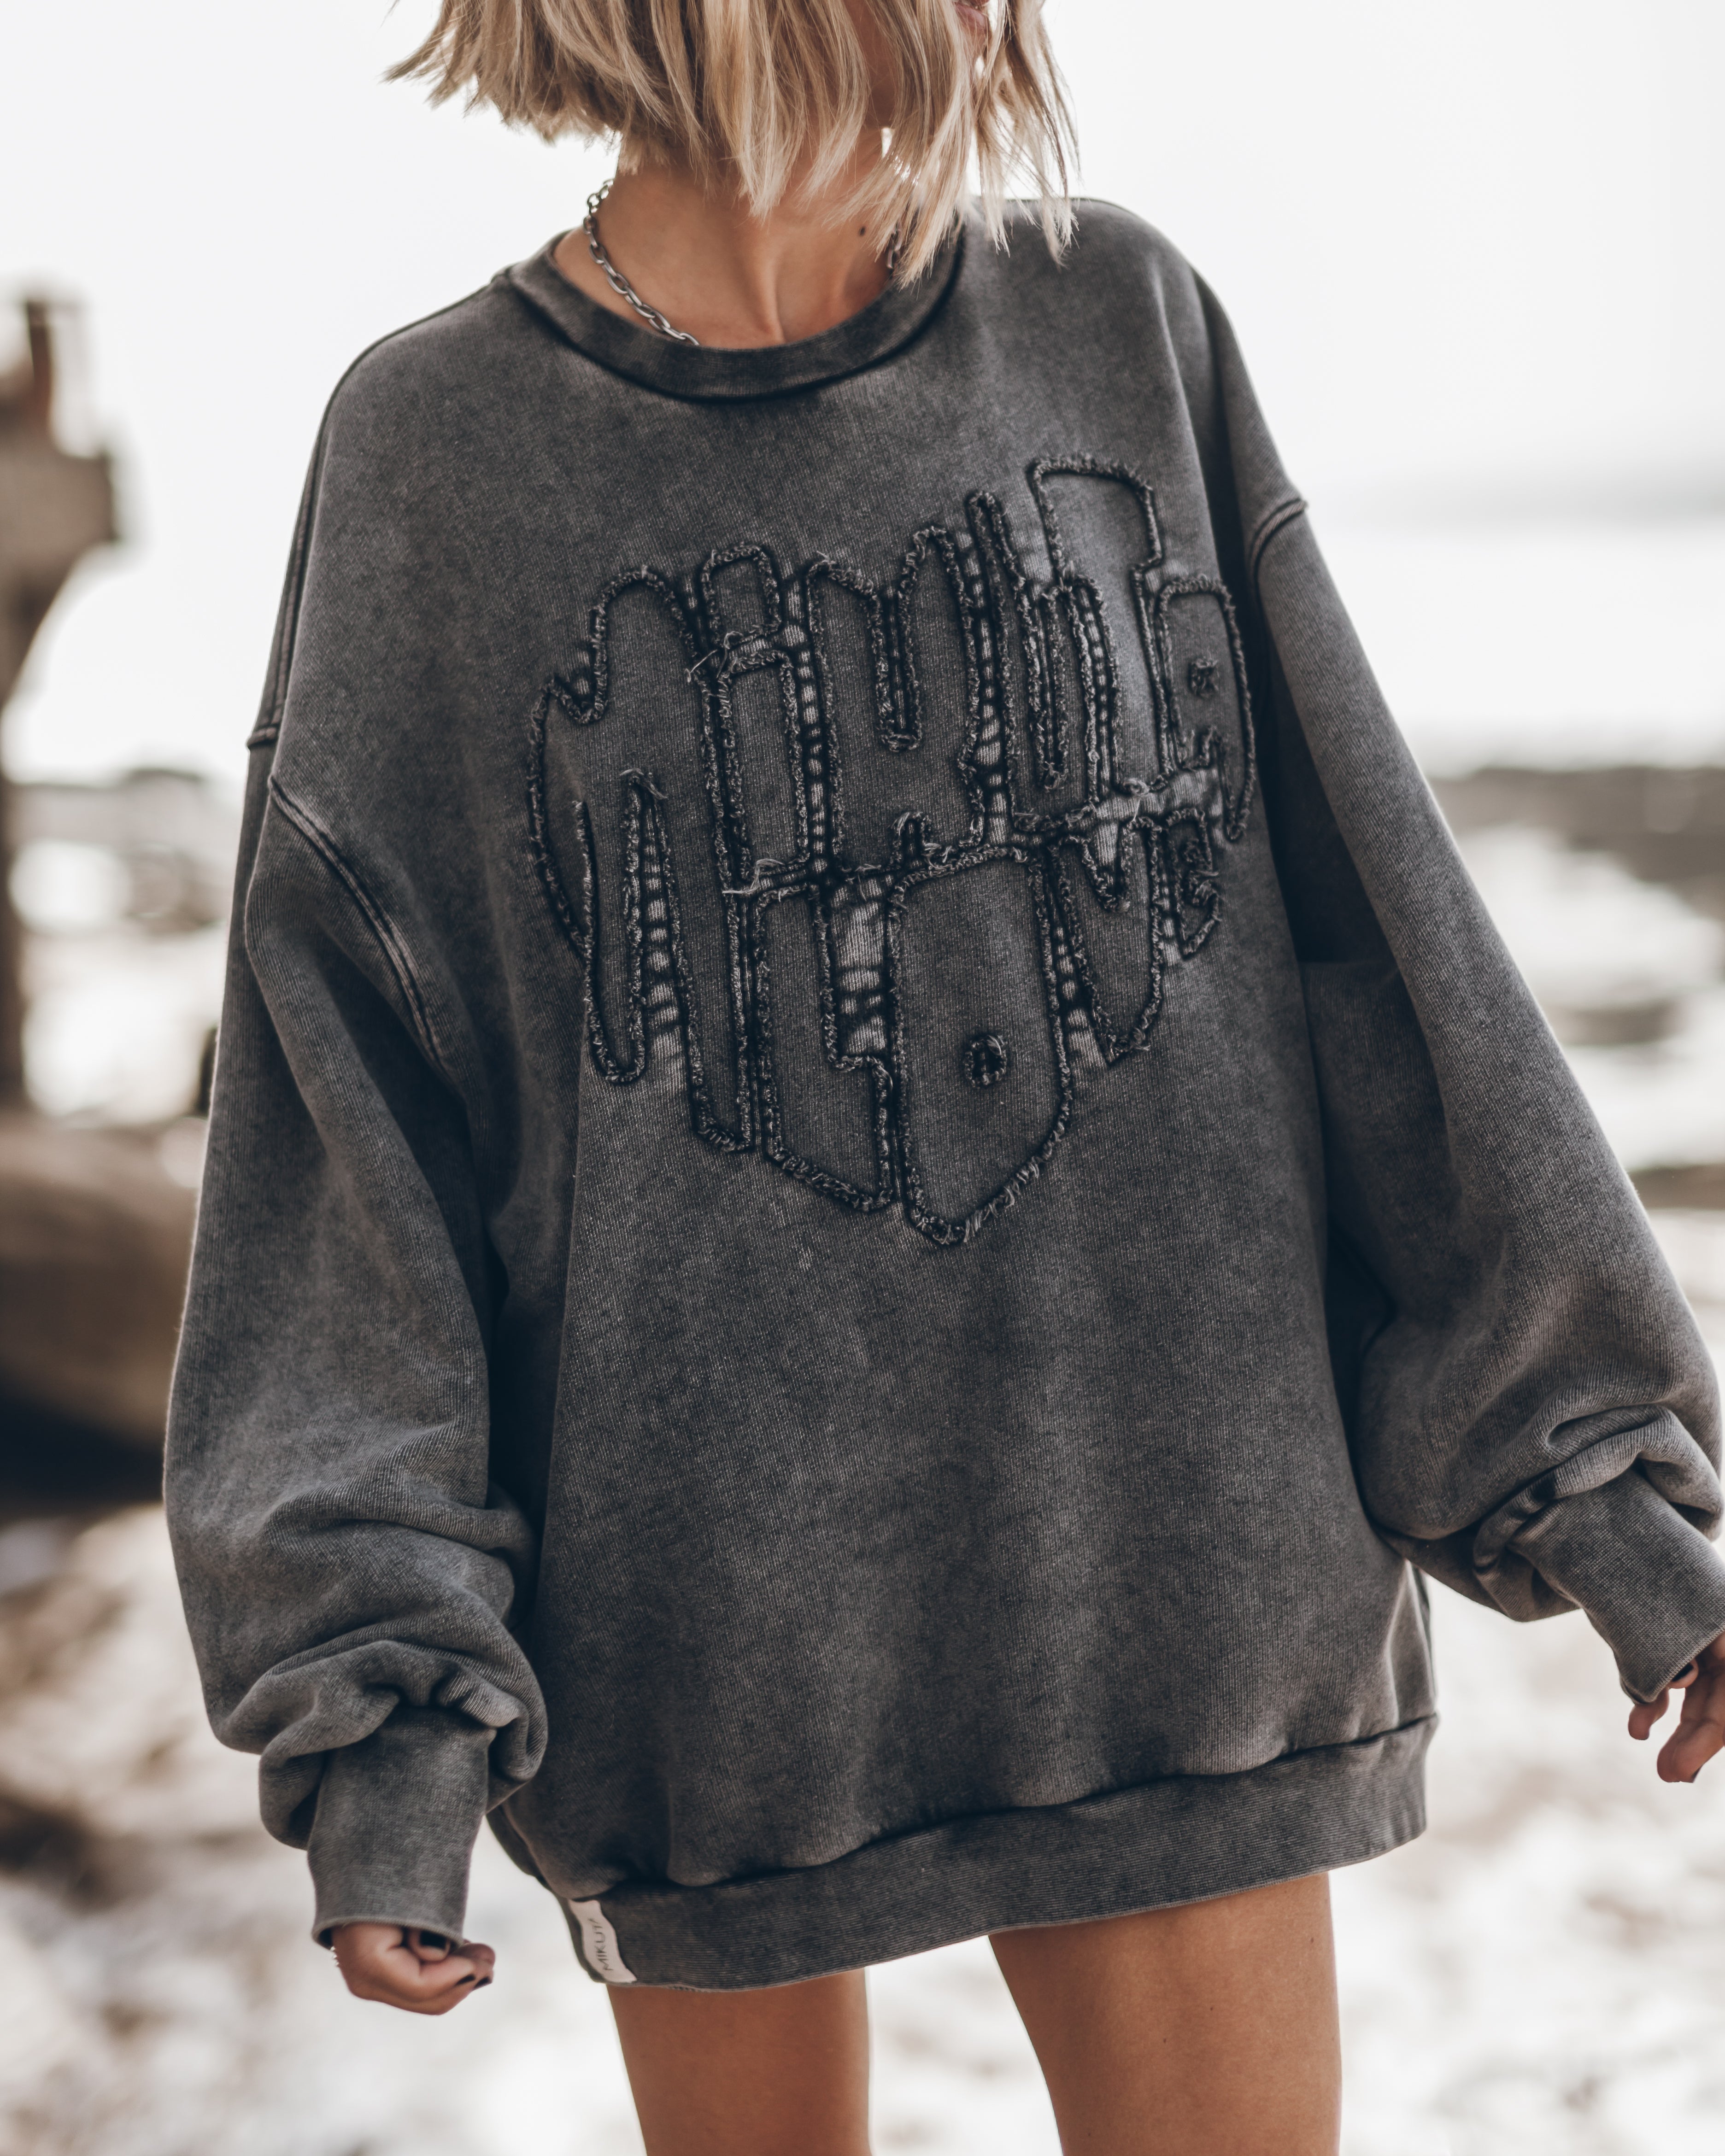 The Grey Faded Love Relaxed Sweater